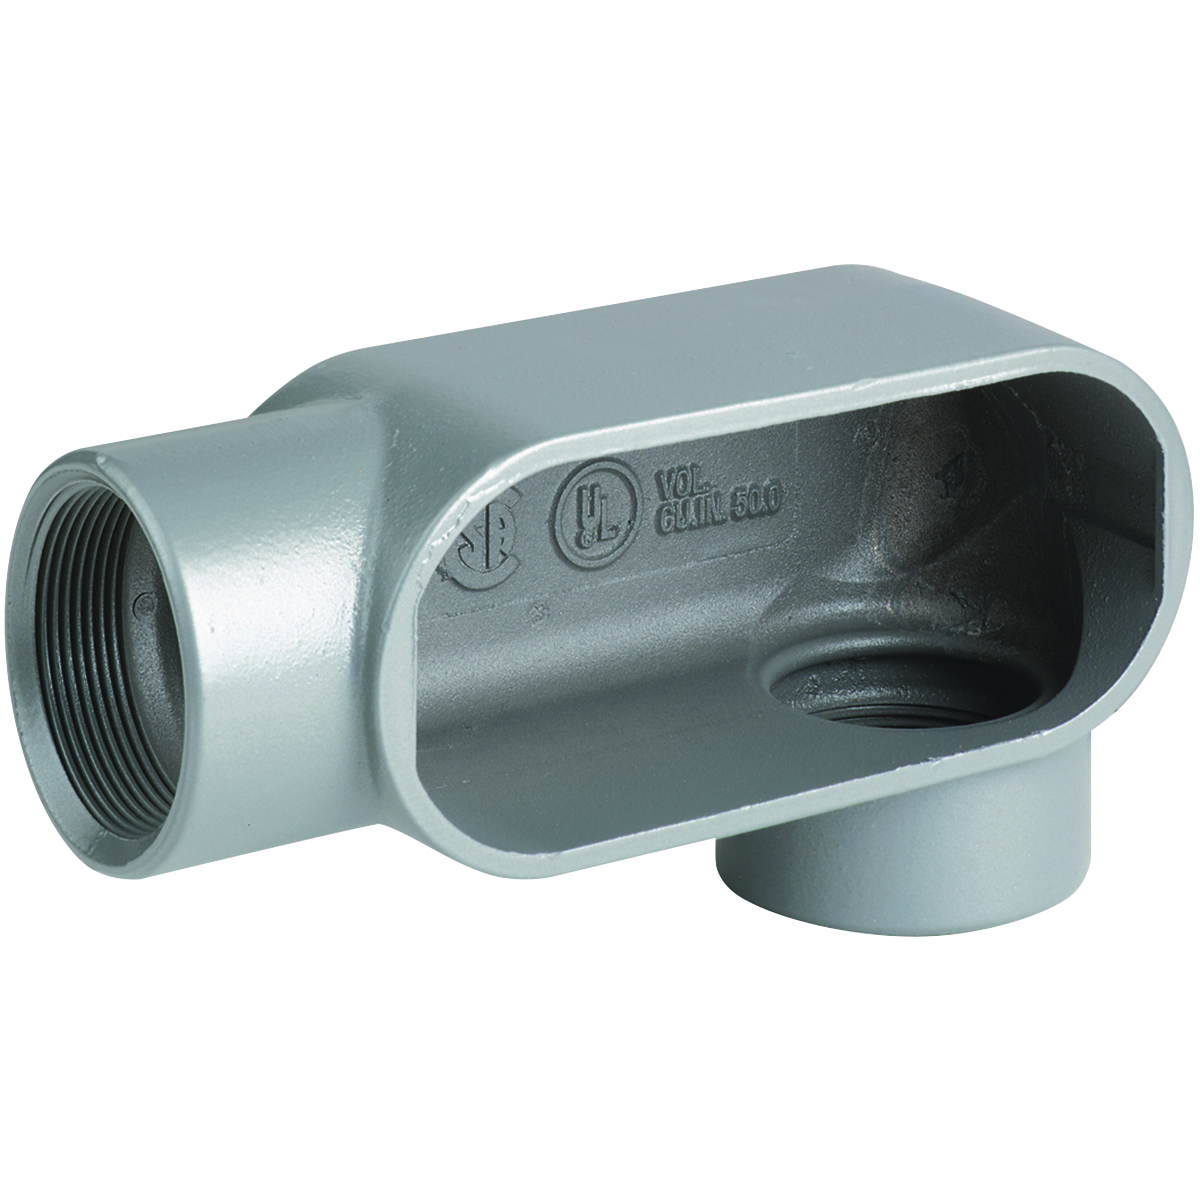 DURALOY 7 SERIES - IRON CONDUIT BODY - LL TYPE - HUB SIZE 1/2 INCH -VOLUME 4.0 CUBIC INCHES